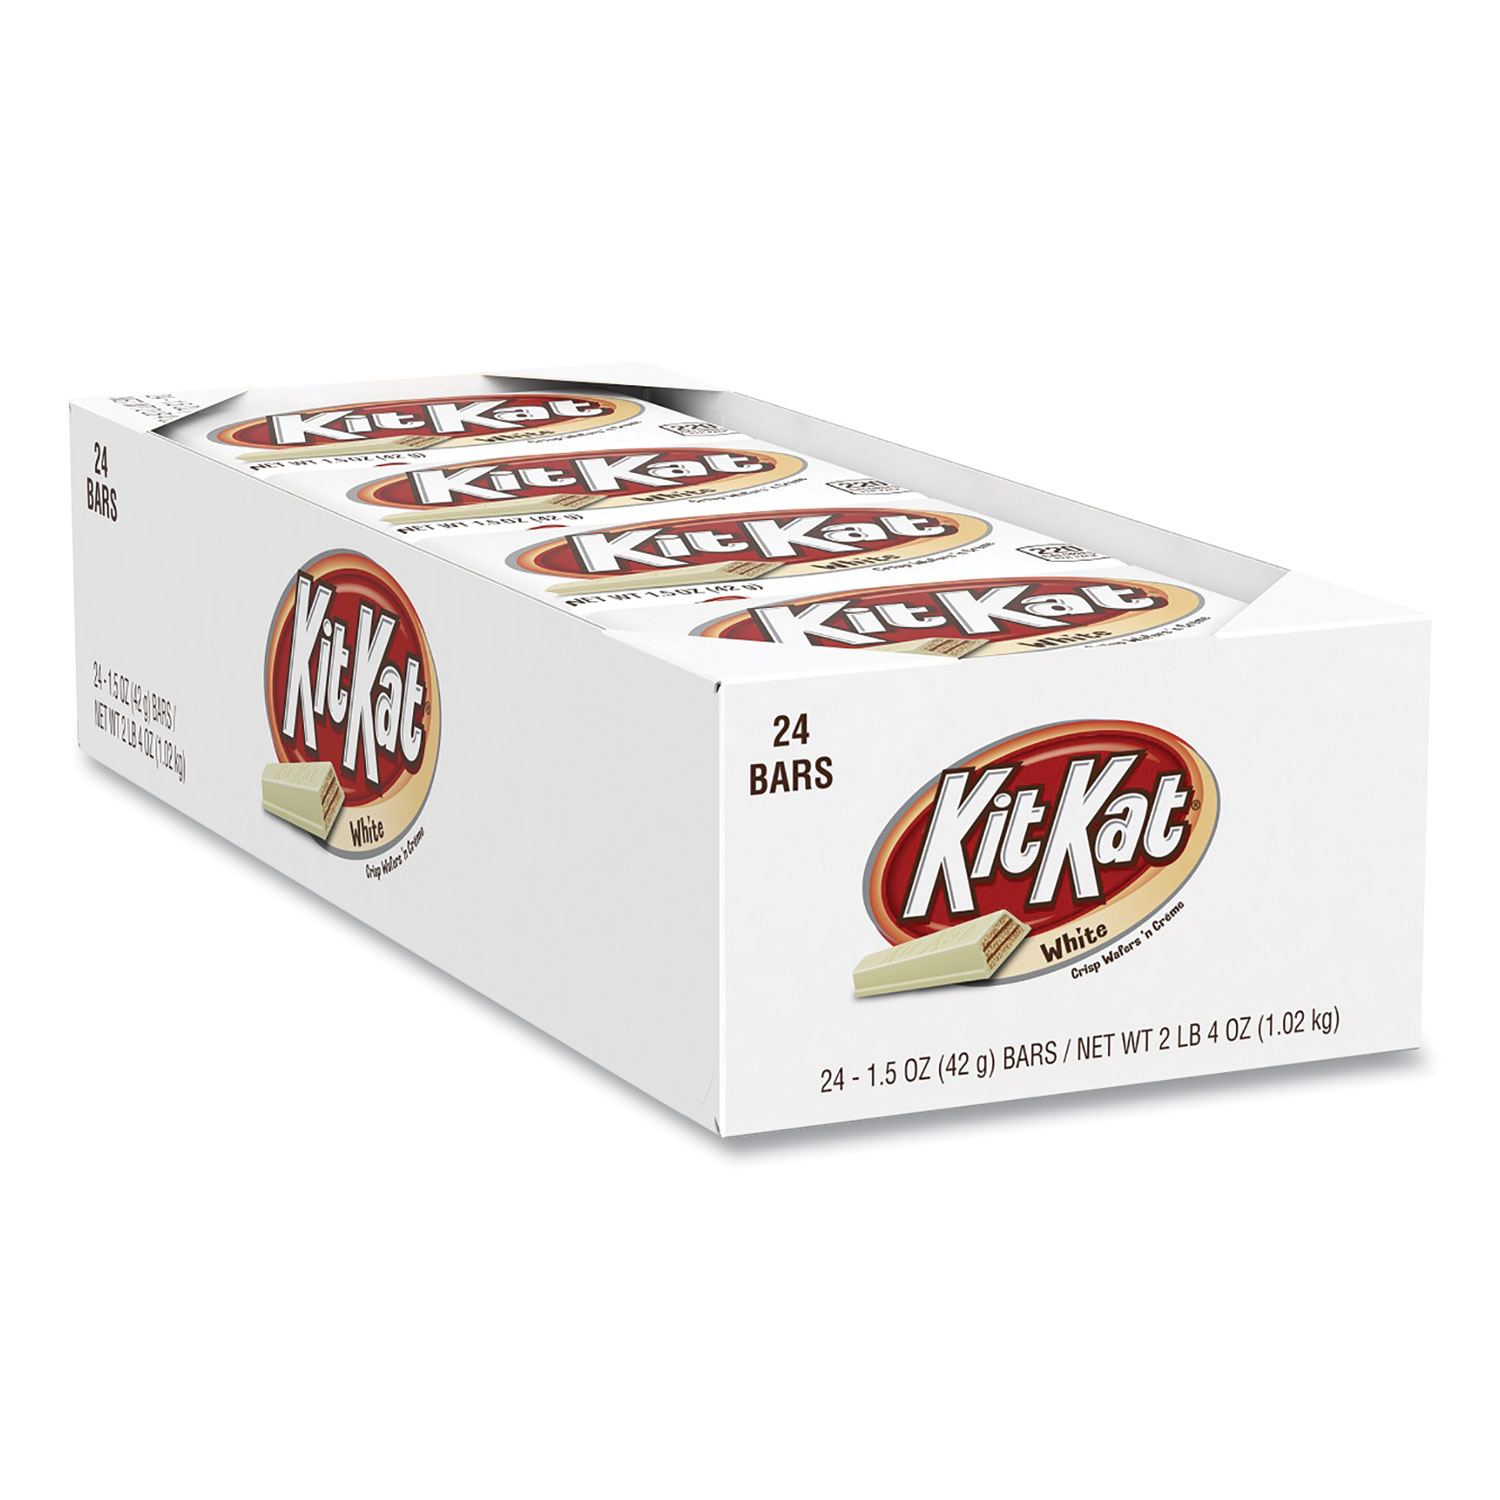  Kit Kat 23610 Wafer Bar with White Creme, 1.5 oz Bar, 24 Bars/Box, Free Delivery in 1-4 Business Days (GRR24600182) 